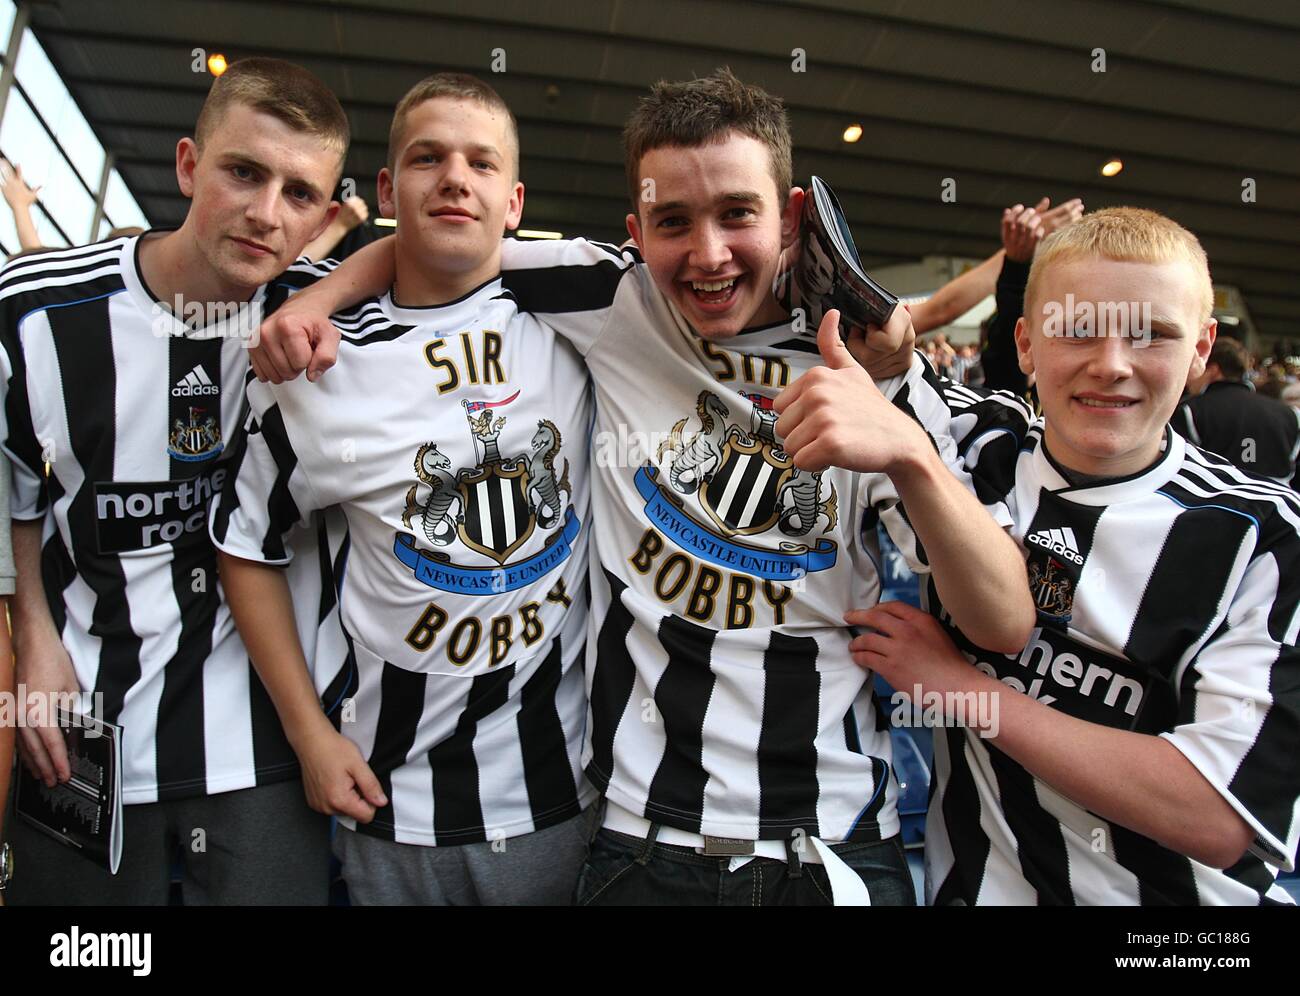 Soccer - Coca-Cola Football League Championship - West Bromwich Albion v Newcastle United - The Hawthorns. Newcastle United fans wear t-shirts in memory of Sir Bobby Robson in the stands. Stock Photo